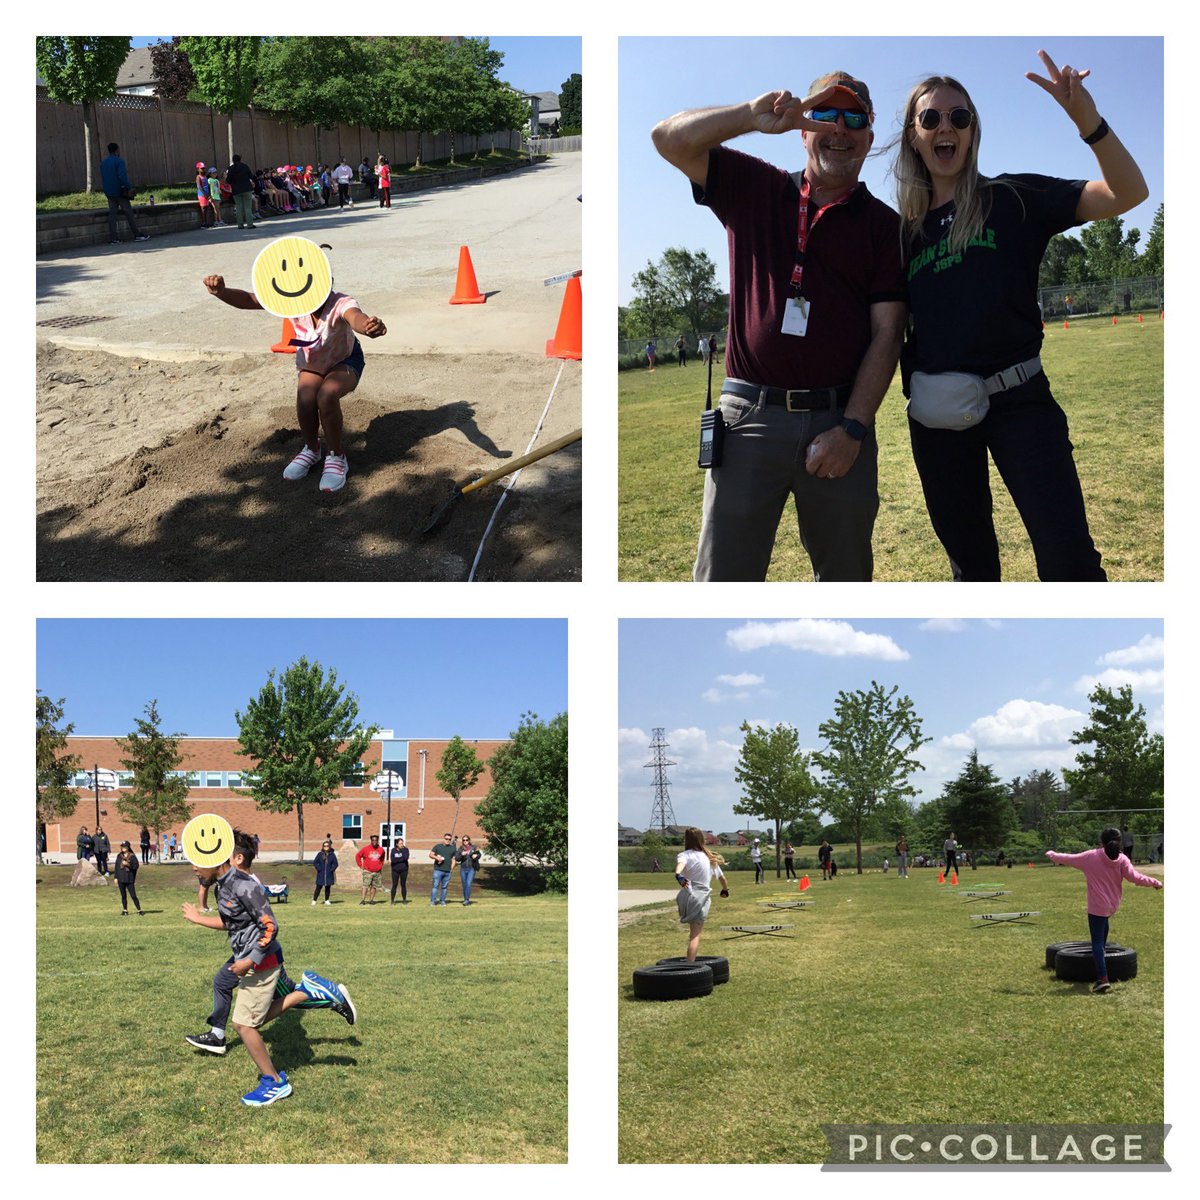 Grade 2/3 Track and Field was such a blast!  Thank you to parents, caregivers, volunteers, and staff for making this day memorable and successful for all. #RunJumpThrow #PhysicalLiteracy #PEForAll #Community